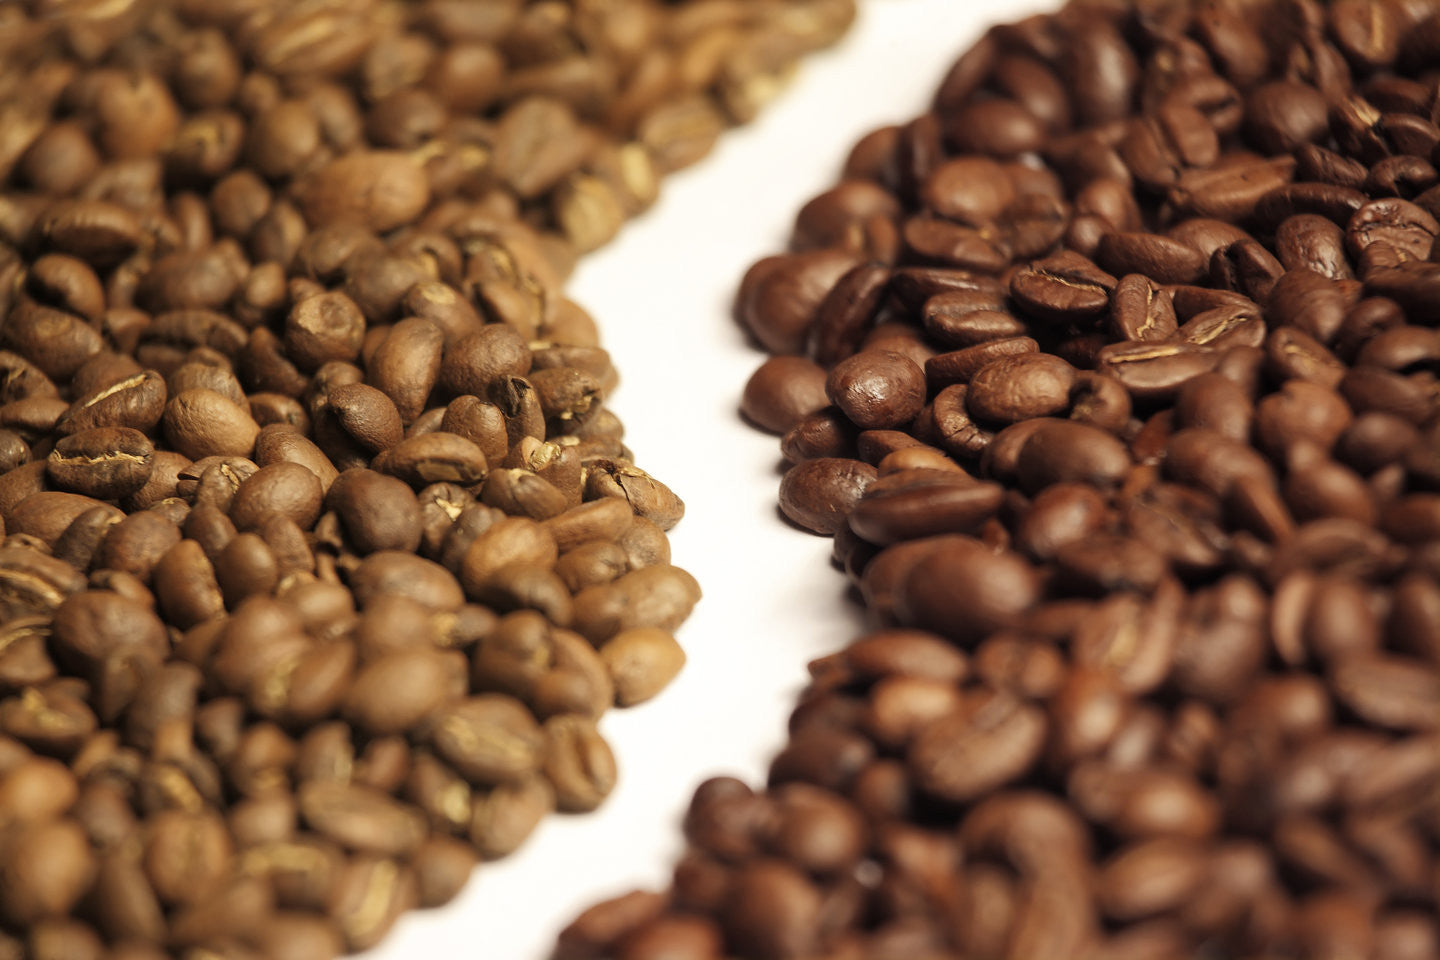 What’s the difference between Arabica and Robusta coffee beans?